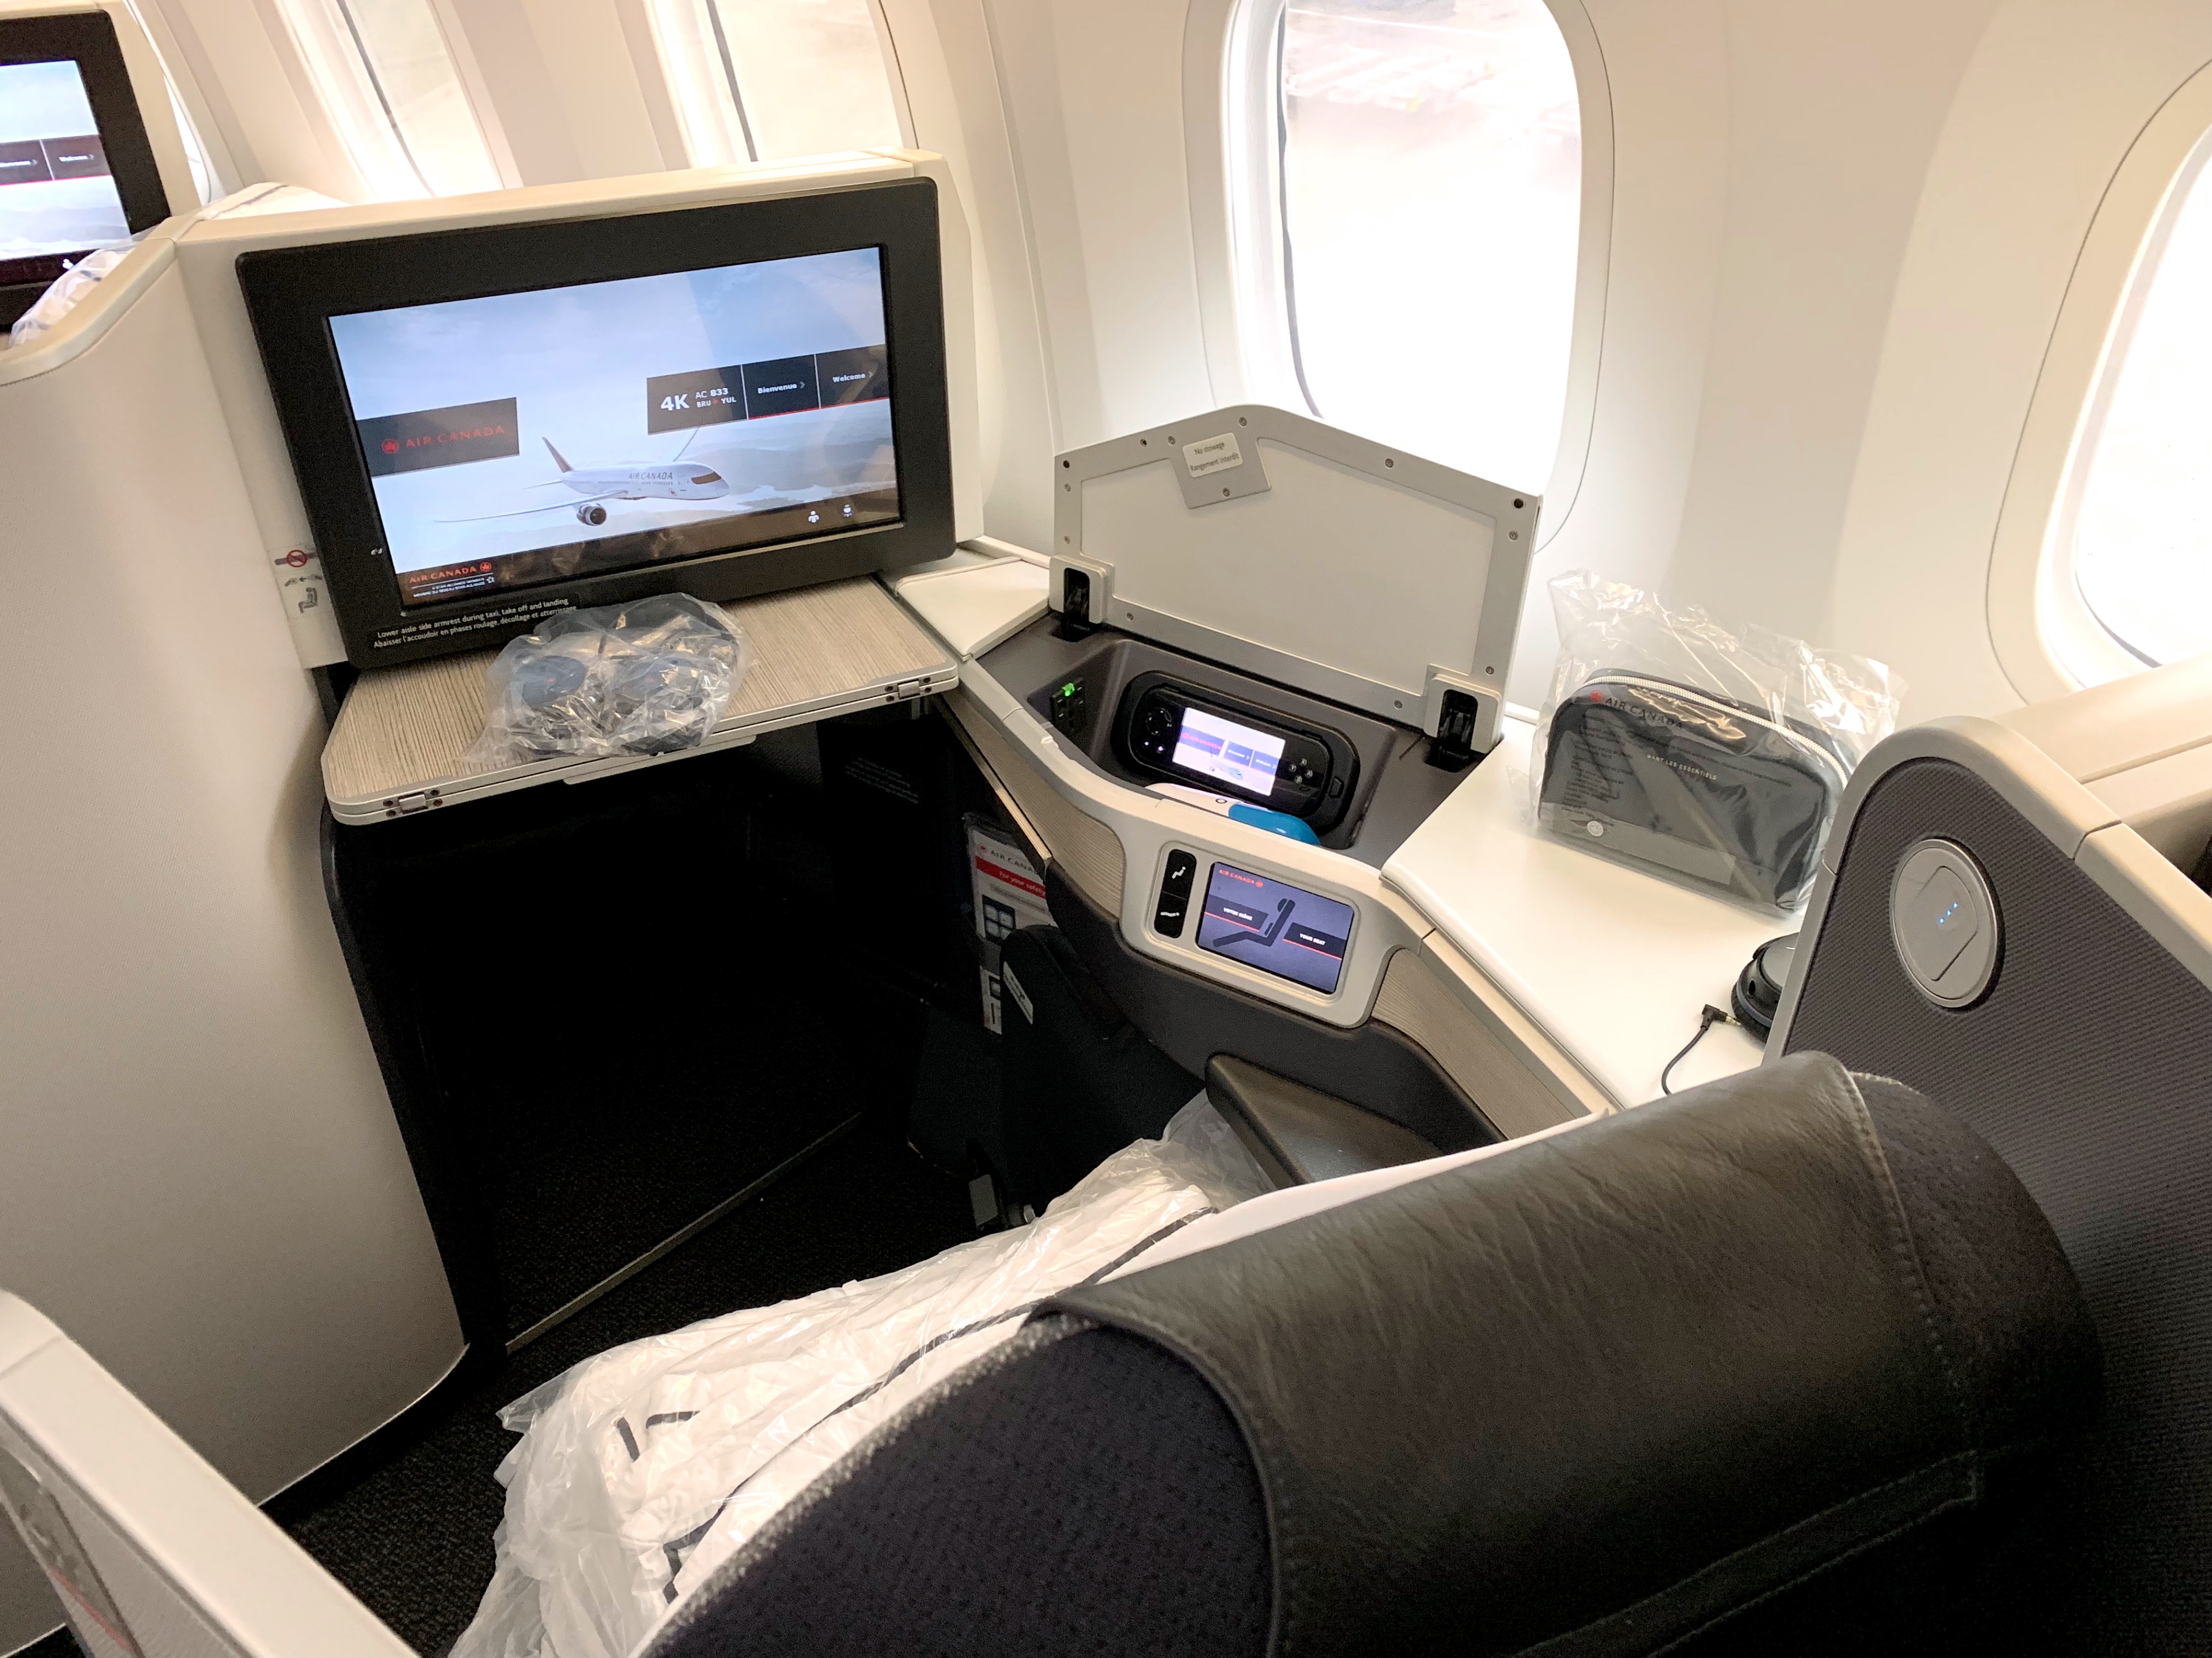 1. Reviews of Air Canada's Boeing 787 Business Class